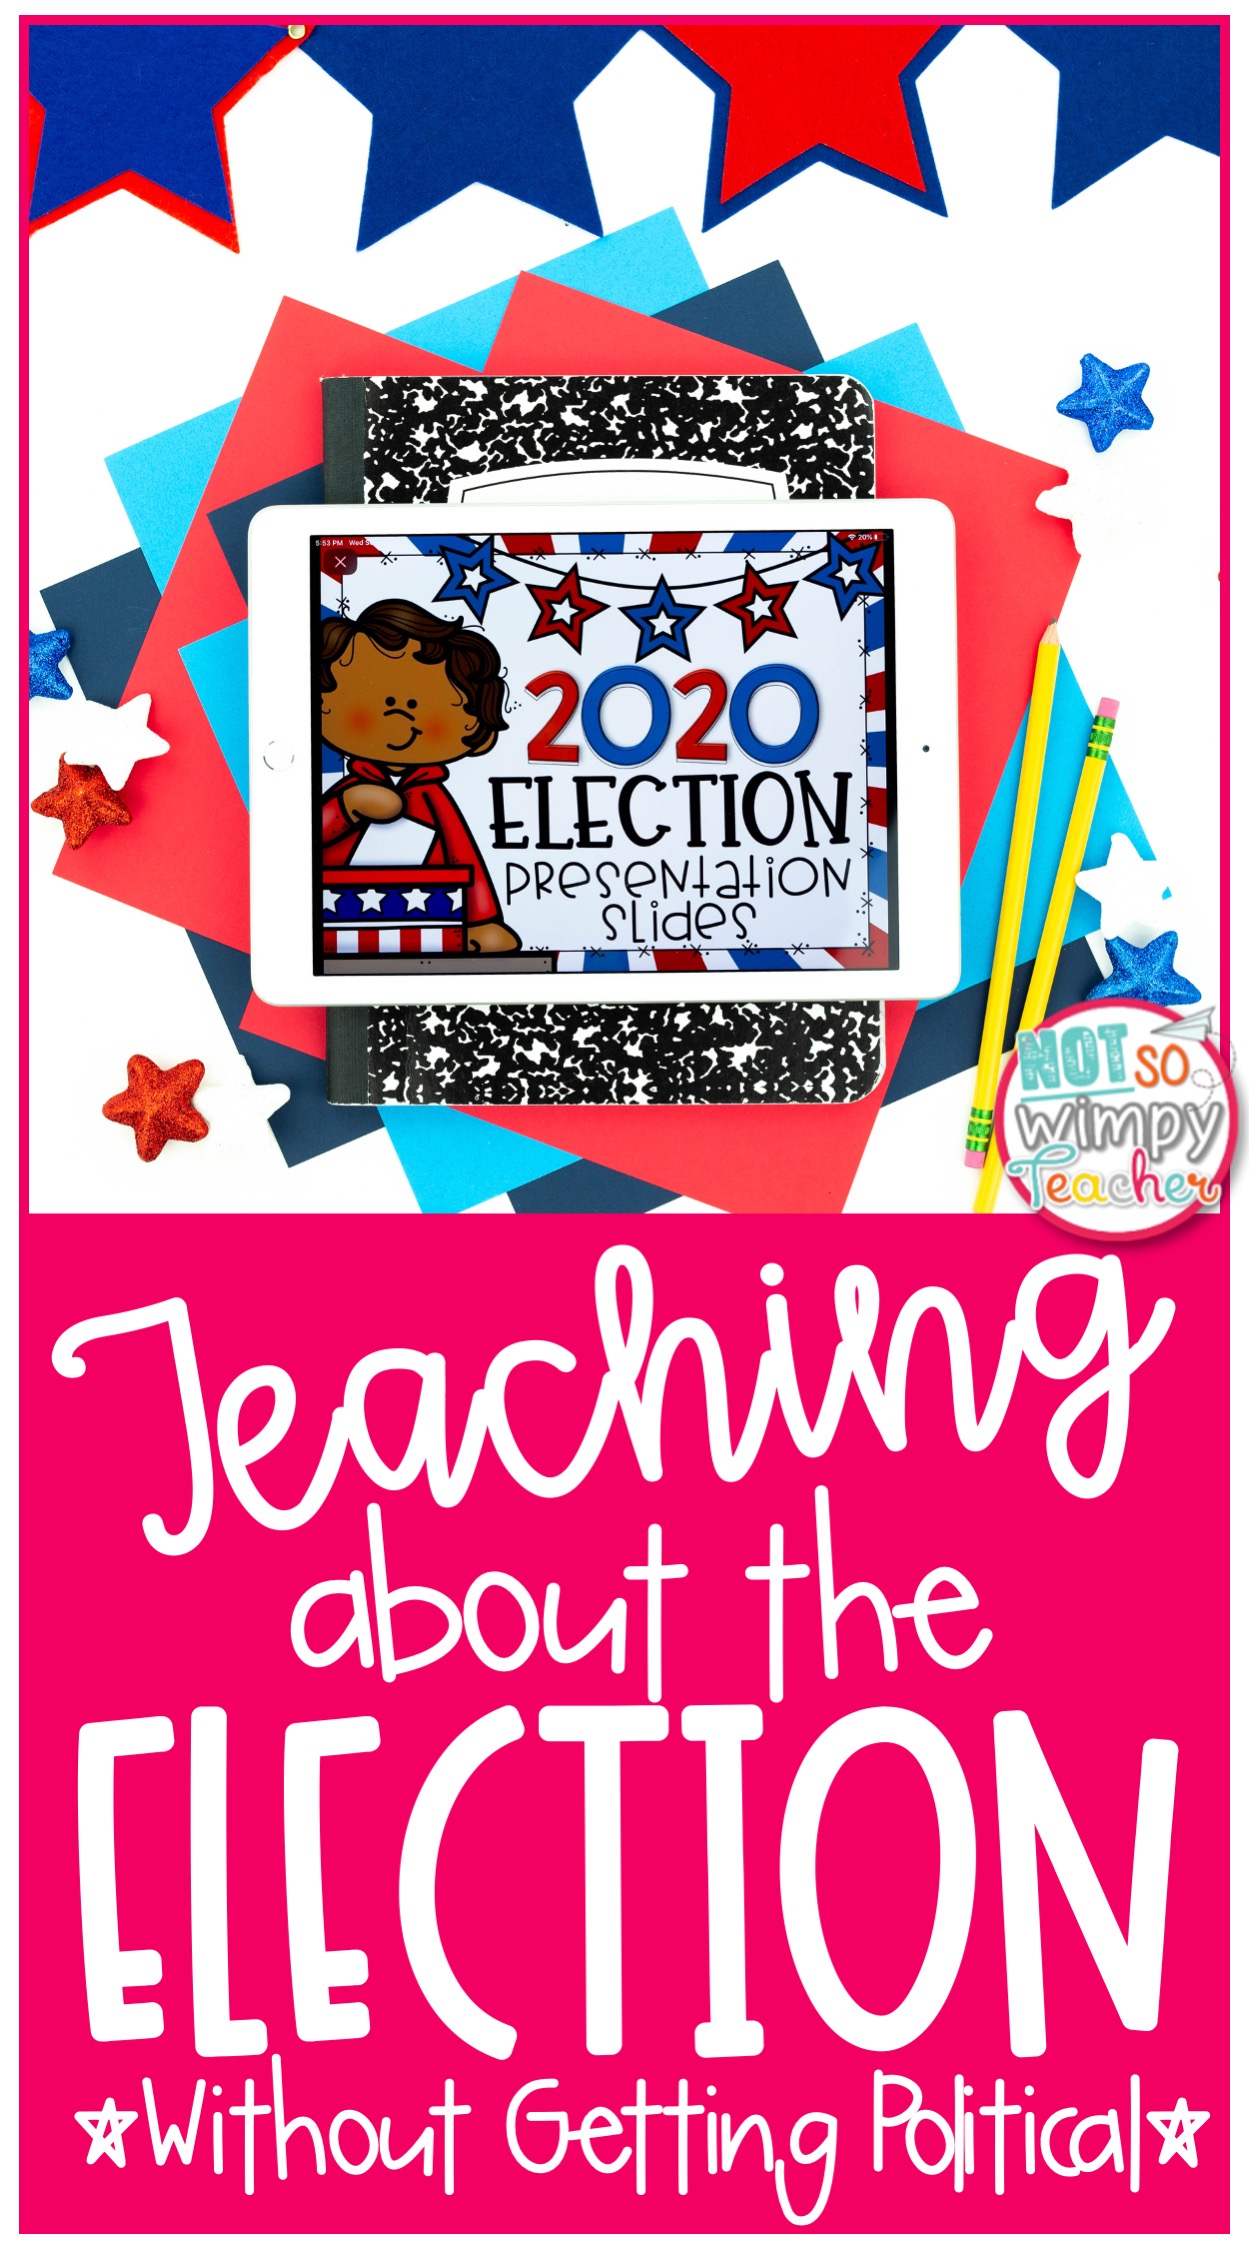 ipad featuring digital election activity for kids